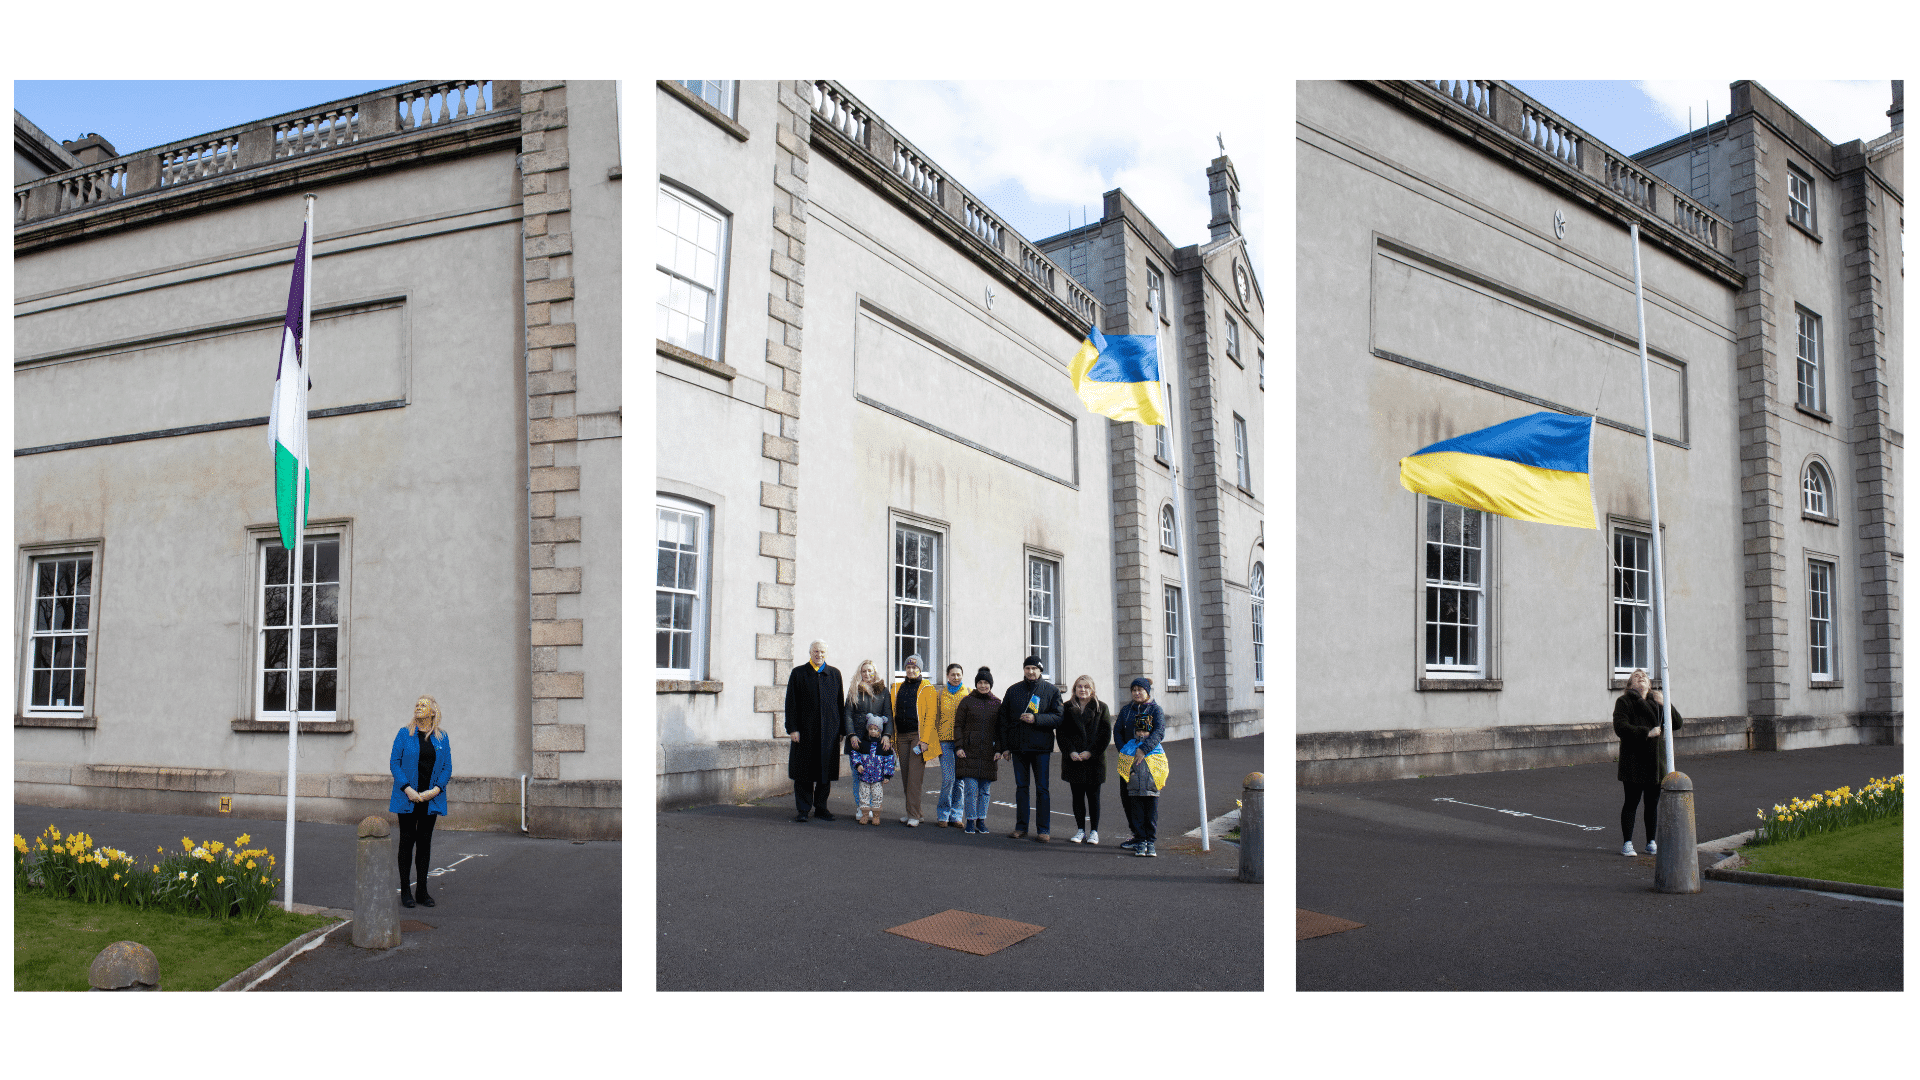 Carlow College raises flags for International Women's day and Ukraine support